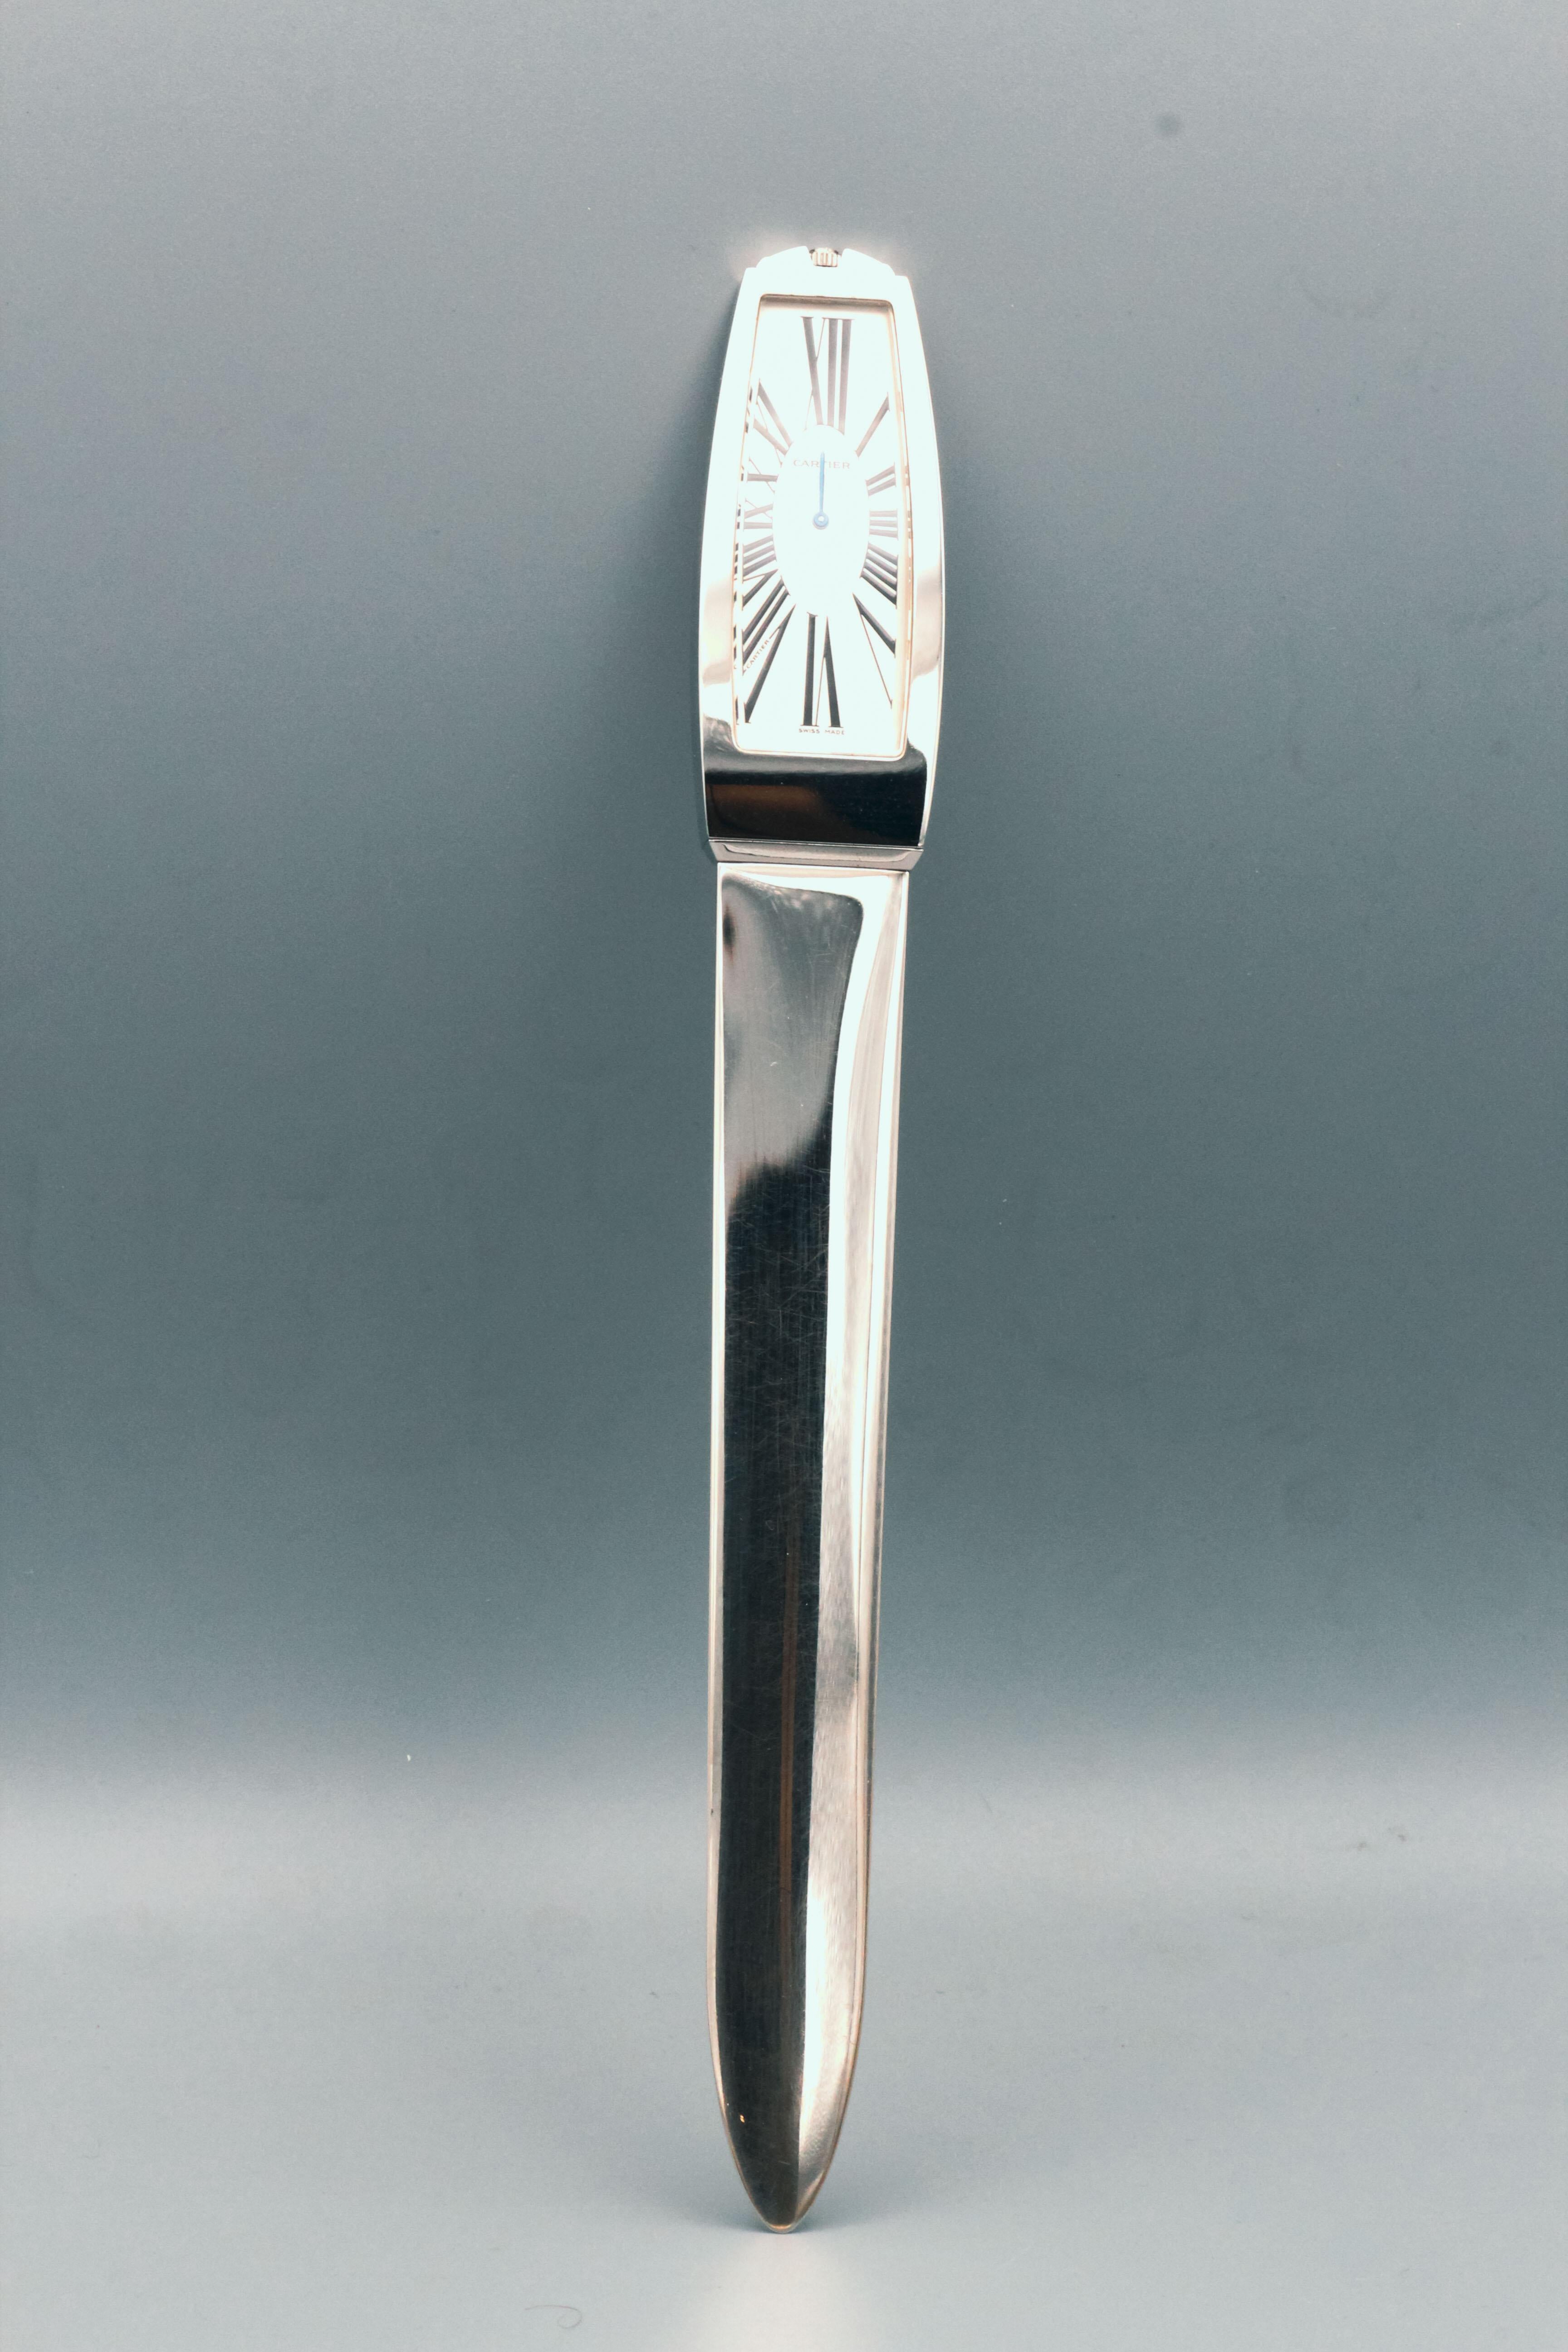 Handsome limited edition (#0371 of 2000 made) clock/letter opener by Cartier. It features a large clock at the end of it, with a quartz movement and roman numerals. Comes with pouch. Beautifully made and would make a great gift.

Hallmarks: Cartier,